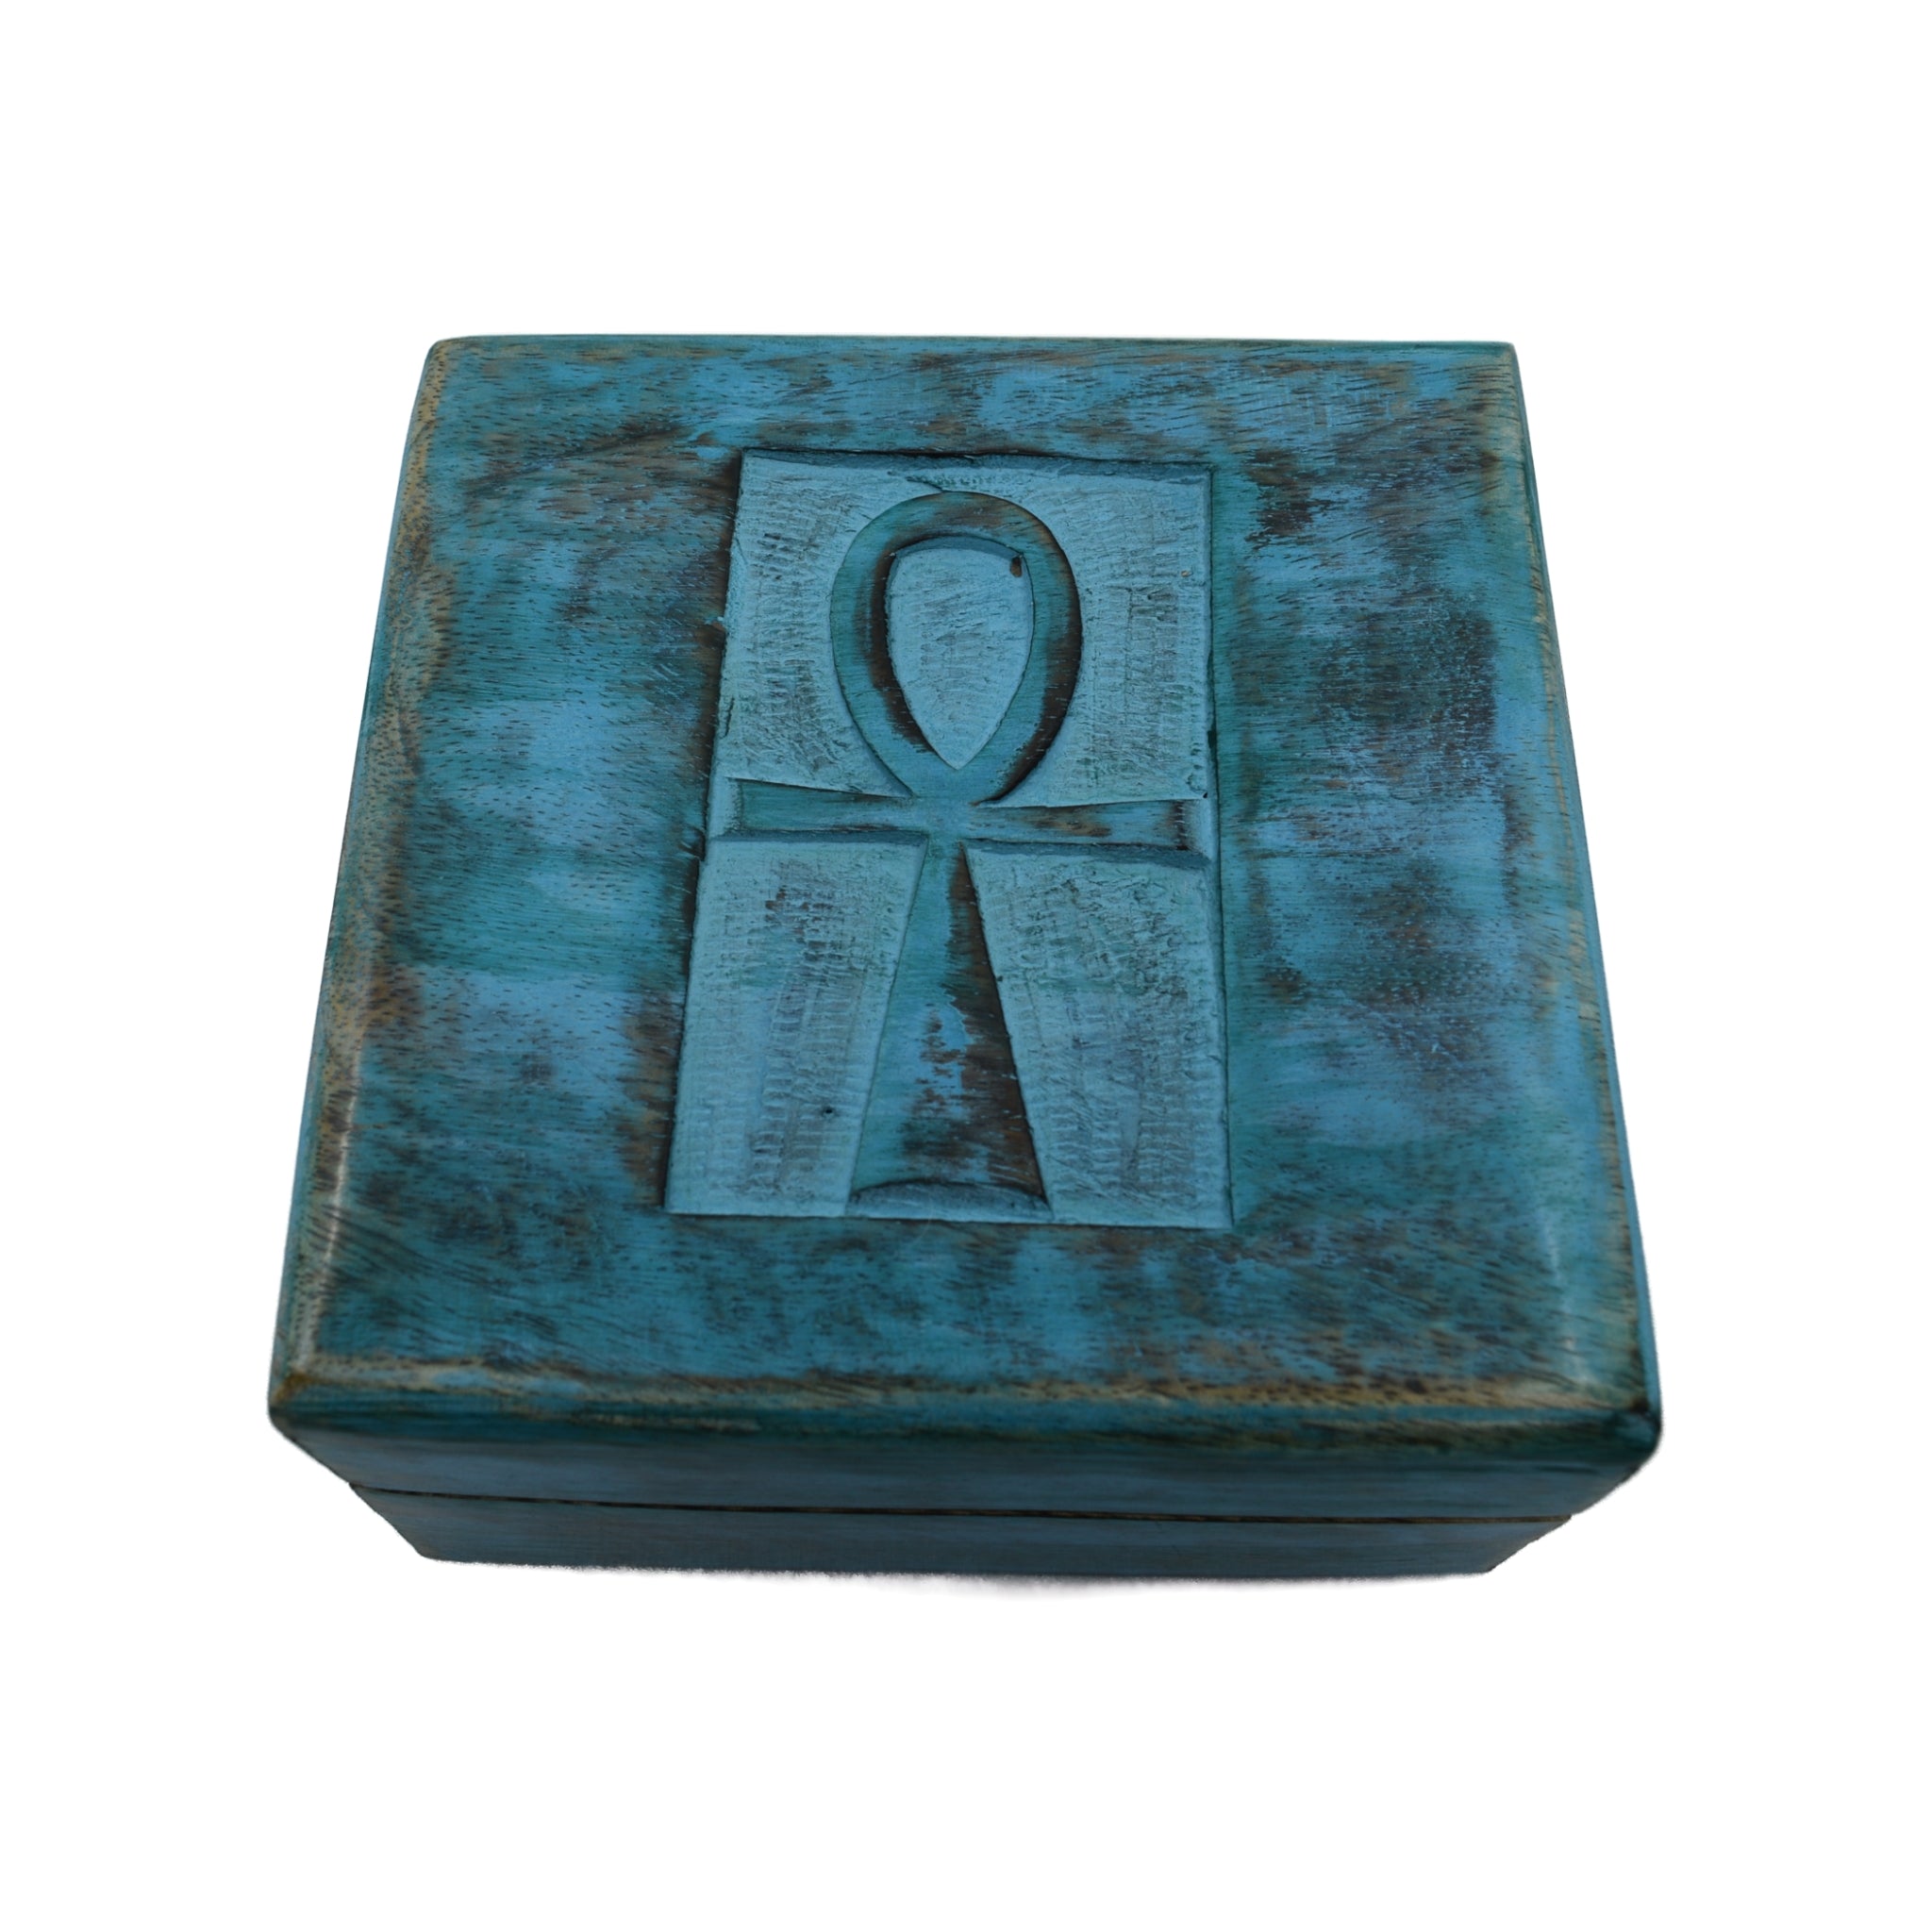 Square, blue wood Box, engraved Ankh on top 